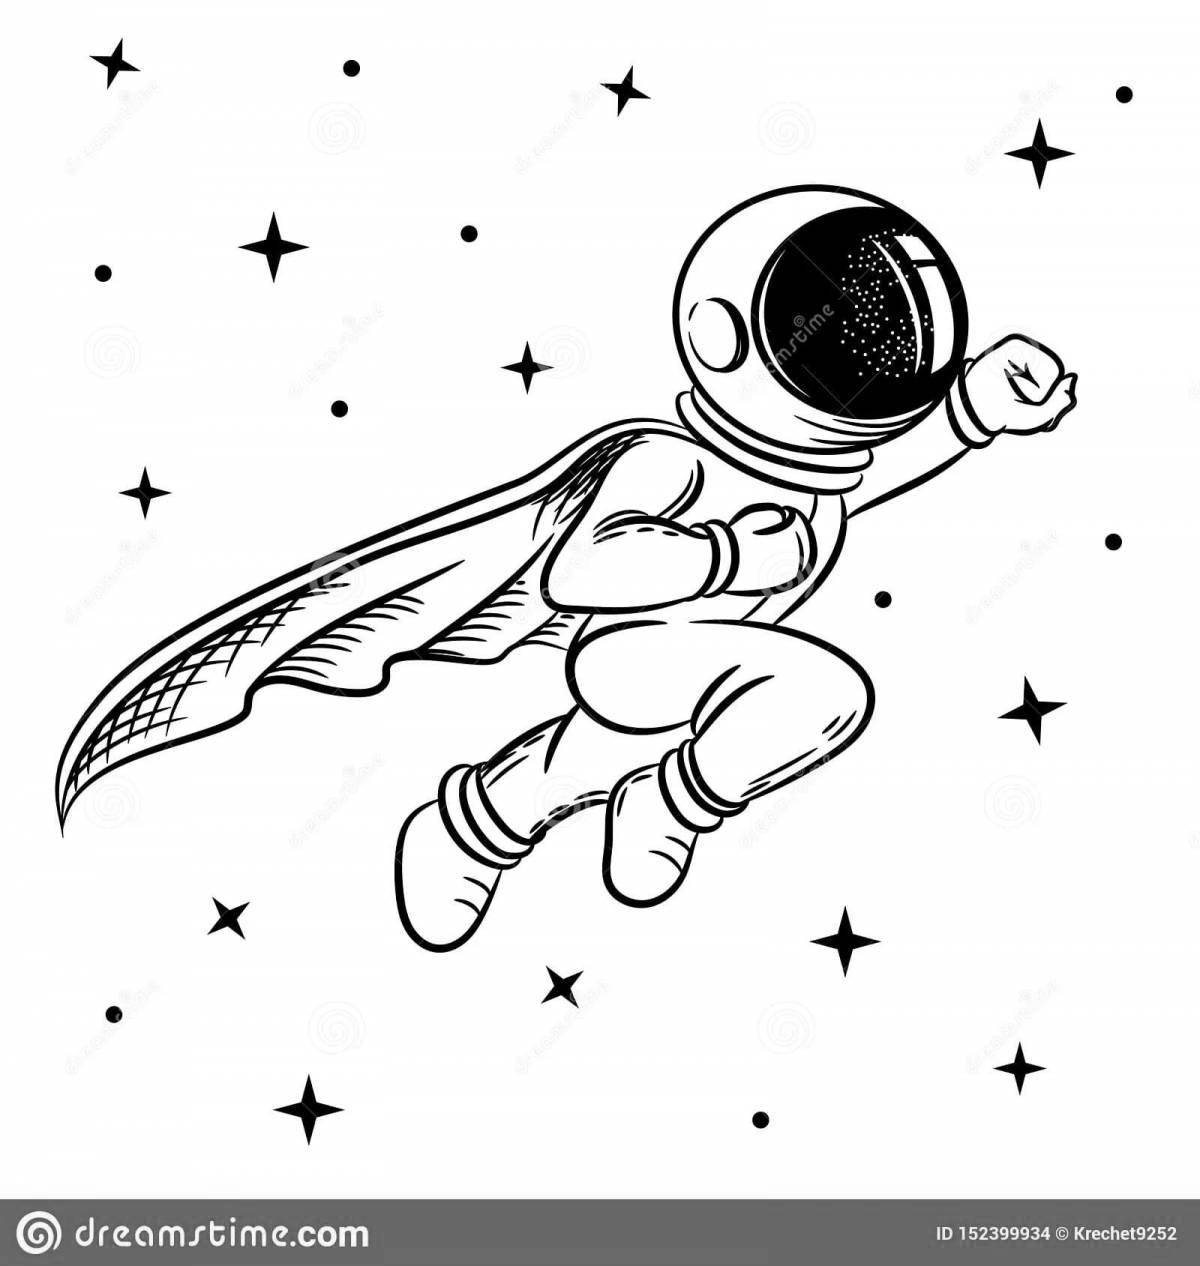 Coloring pages animals in orbit